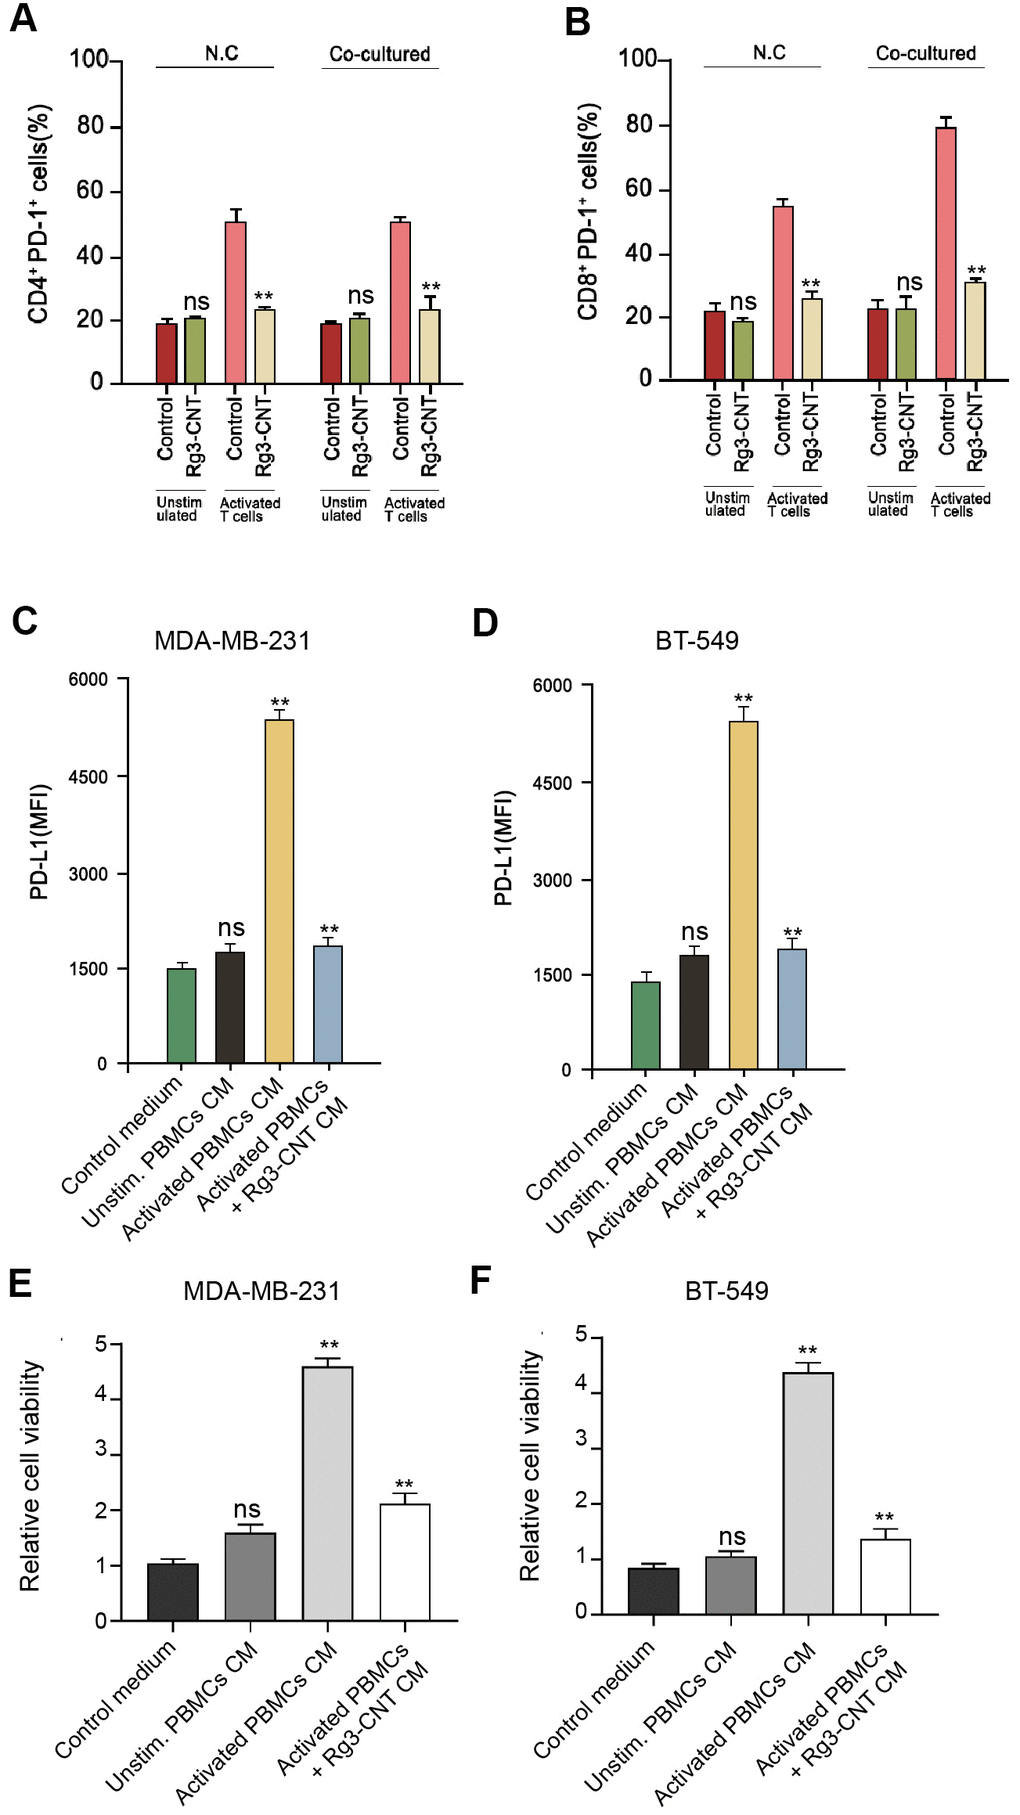 Rg3-CNT reduces the PD-1/PD-L1 axis in a T cell/triple-negative TNBC cell co-culture system. (A, B) MDA-MB-231 or BT-549 cells alone or co-cultured with unstimulated PBMCs or activated T cells obtained from human normal blood donors at a ratio of 1:10 (tumor cells: T cells) were analyzed for PD-L1 expression. (C, D) MDA-MB-231 and BT-549 cells were cultured with the generated conditioned media prior to PD-L1 expression analysis. (E, F) The cell viability was measured by the MTT assays in the cells. Data are presented as mean ± SD. Statistic significant differences were indicated: ns no significance, ** P 